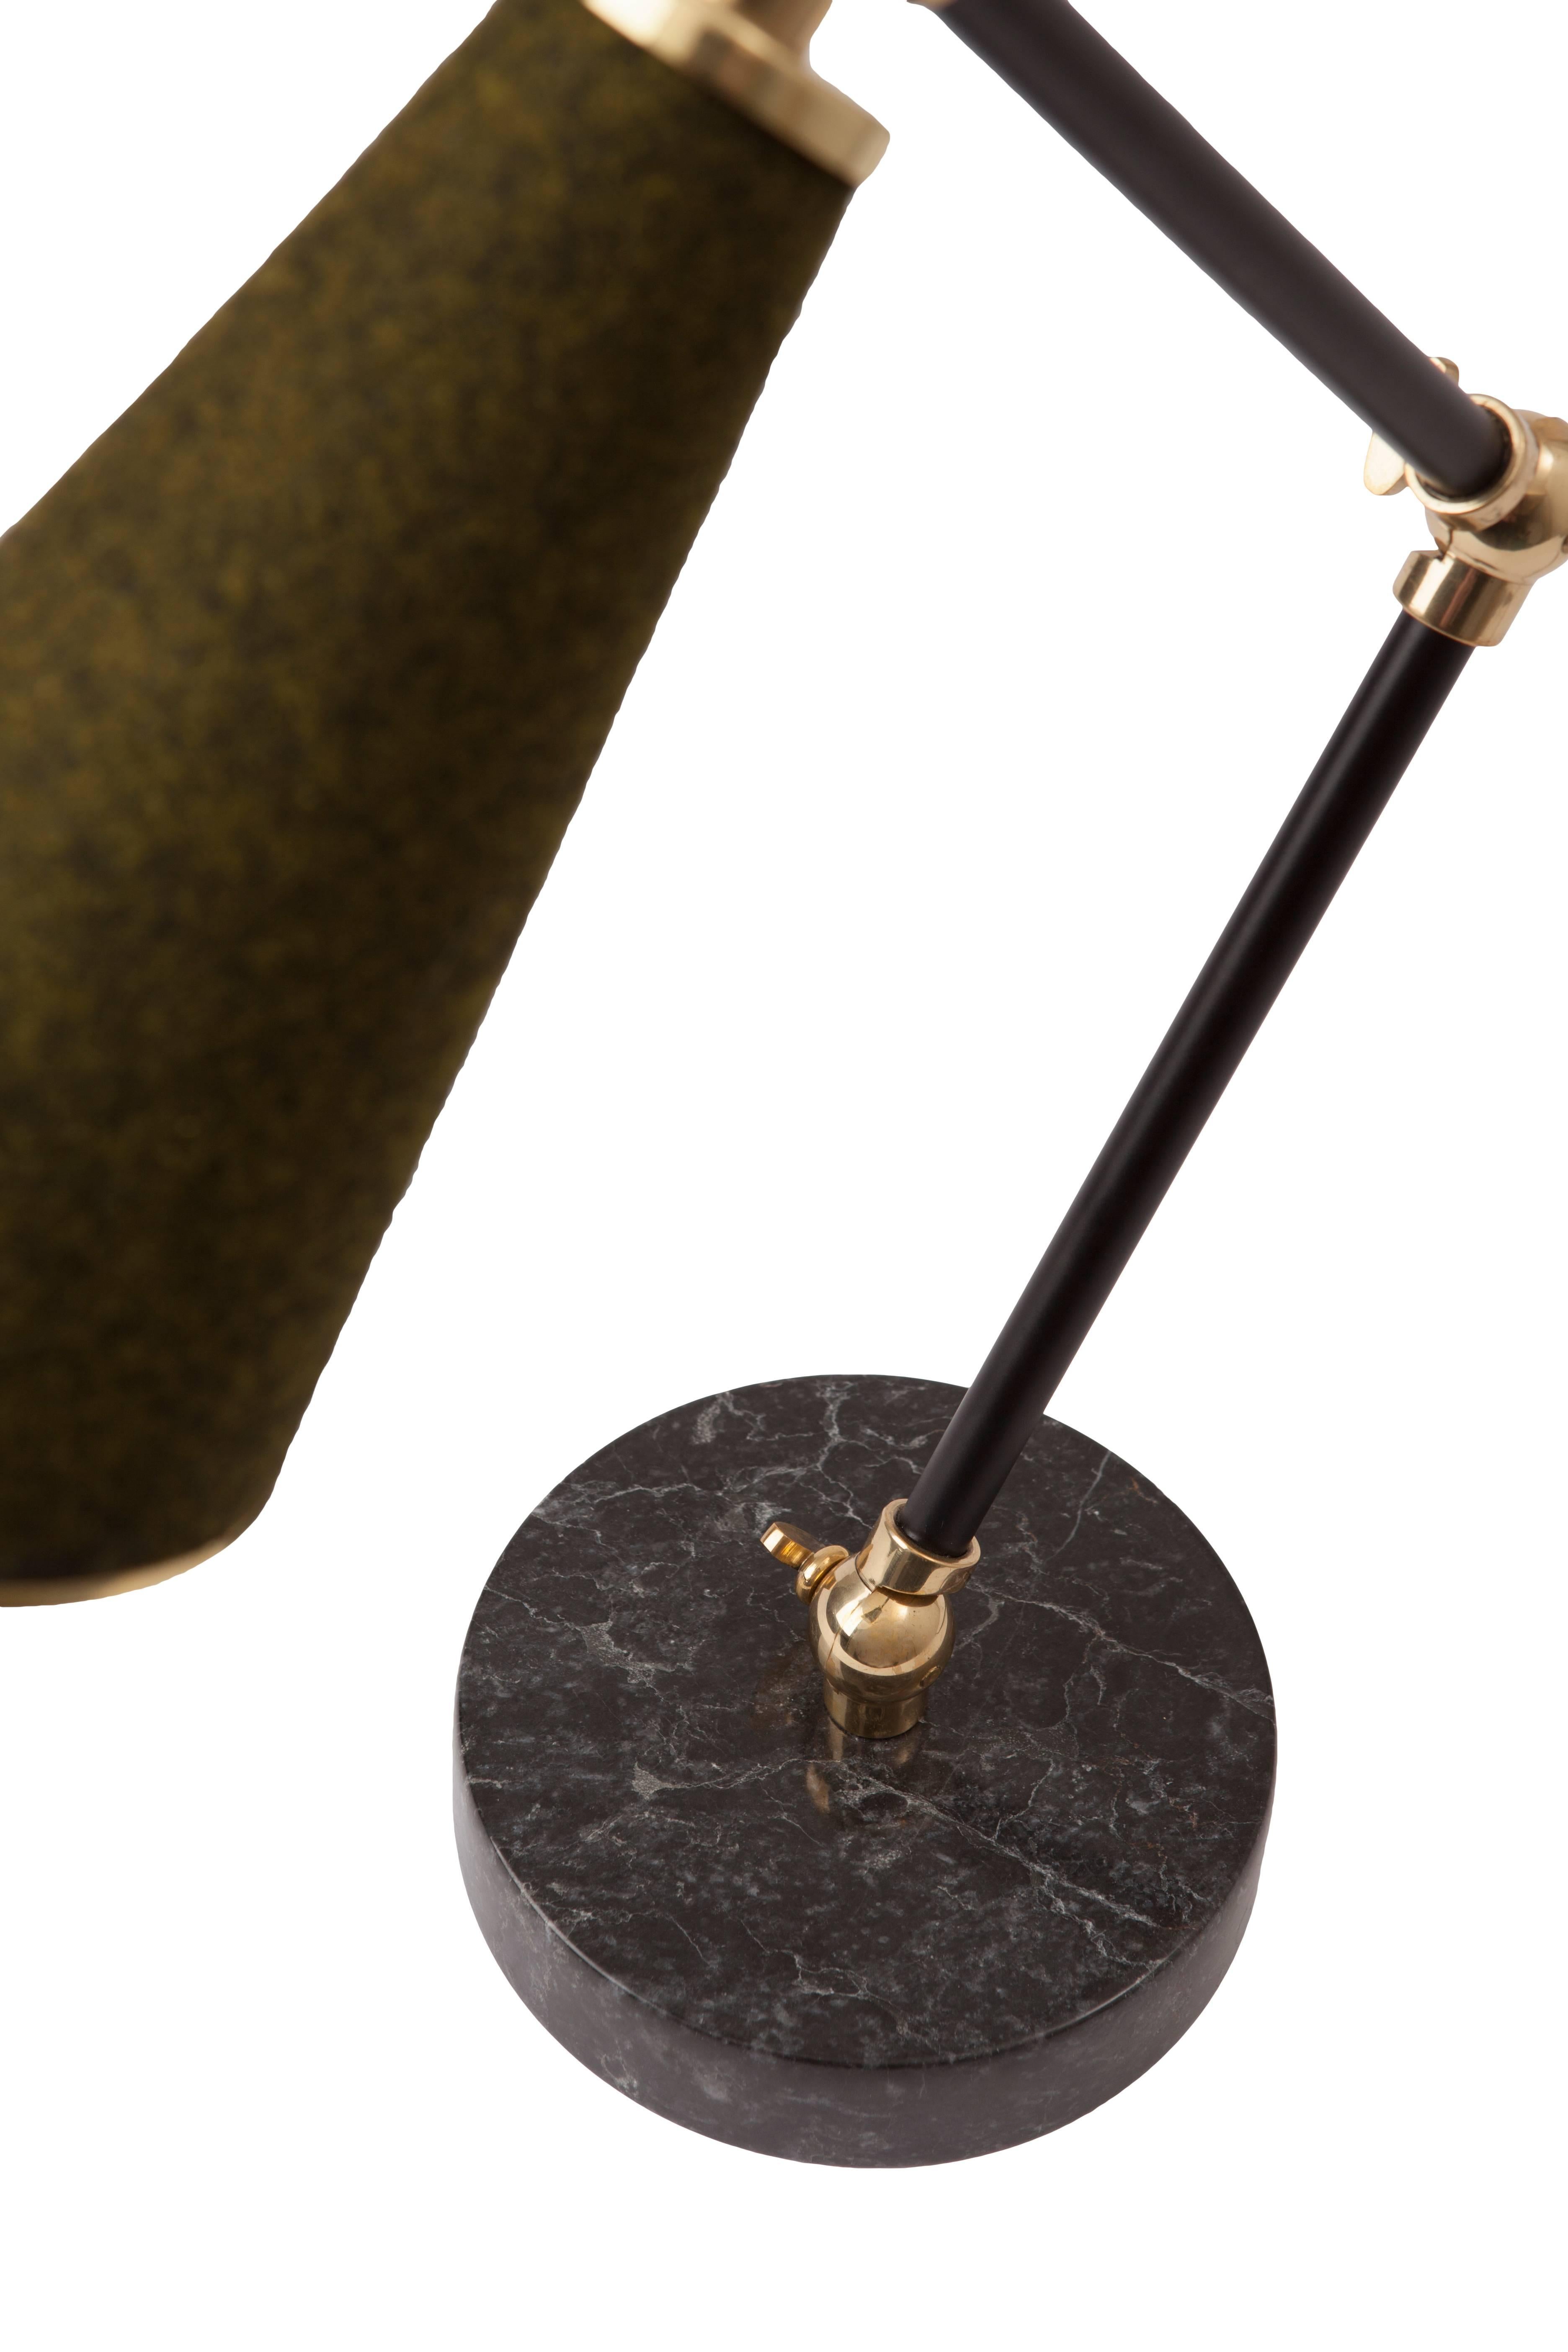 Turkish Lanterna Table Lamp in Black Marble, Felt and Leather Clad Brass Adjustable Arms For Sale